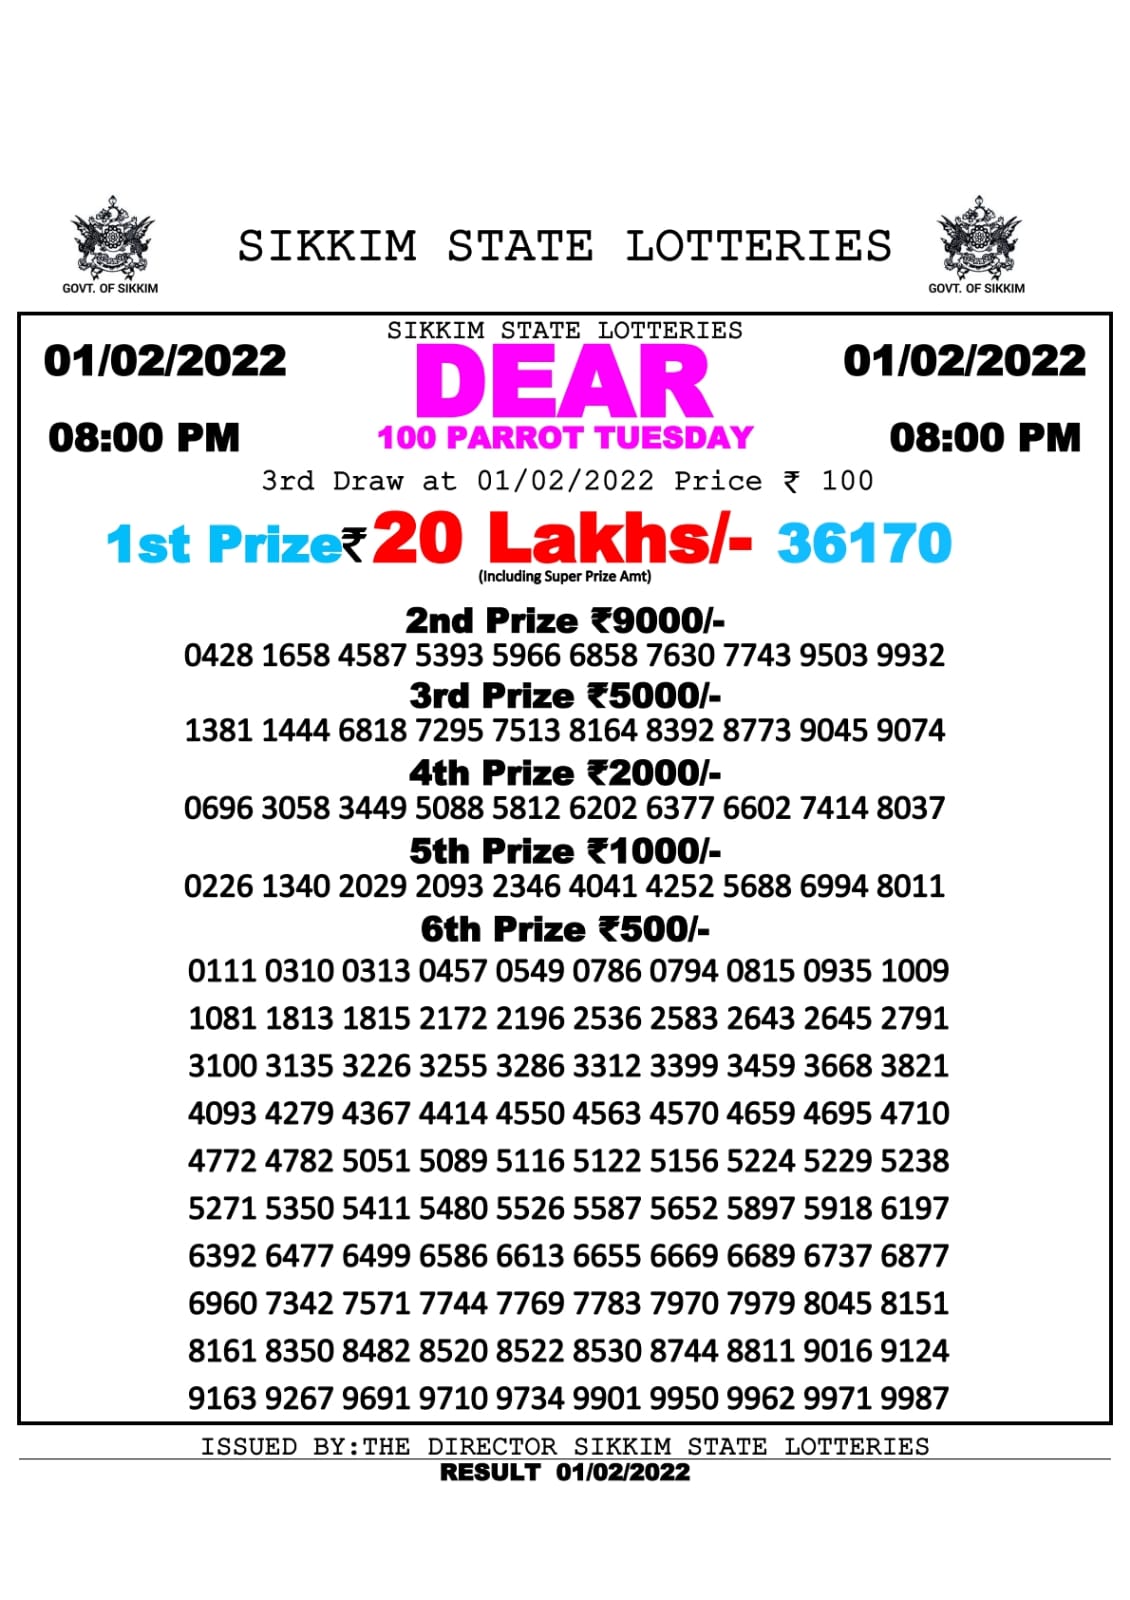 DEAR 100 WEEKLY LOTTERY RESULT 8.00 PM .01.02.2022